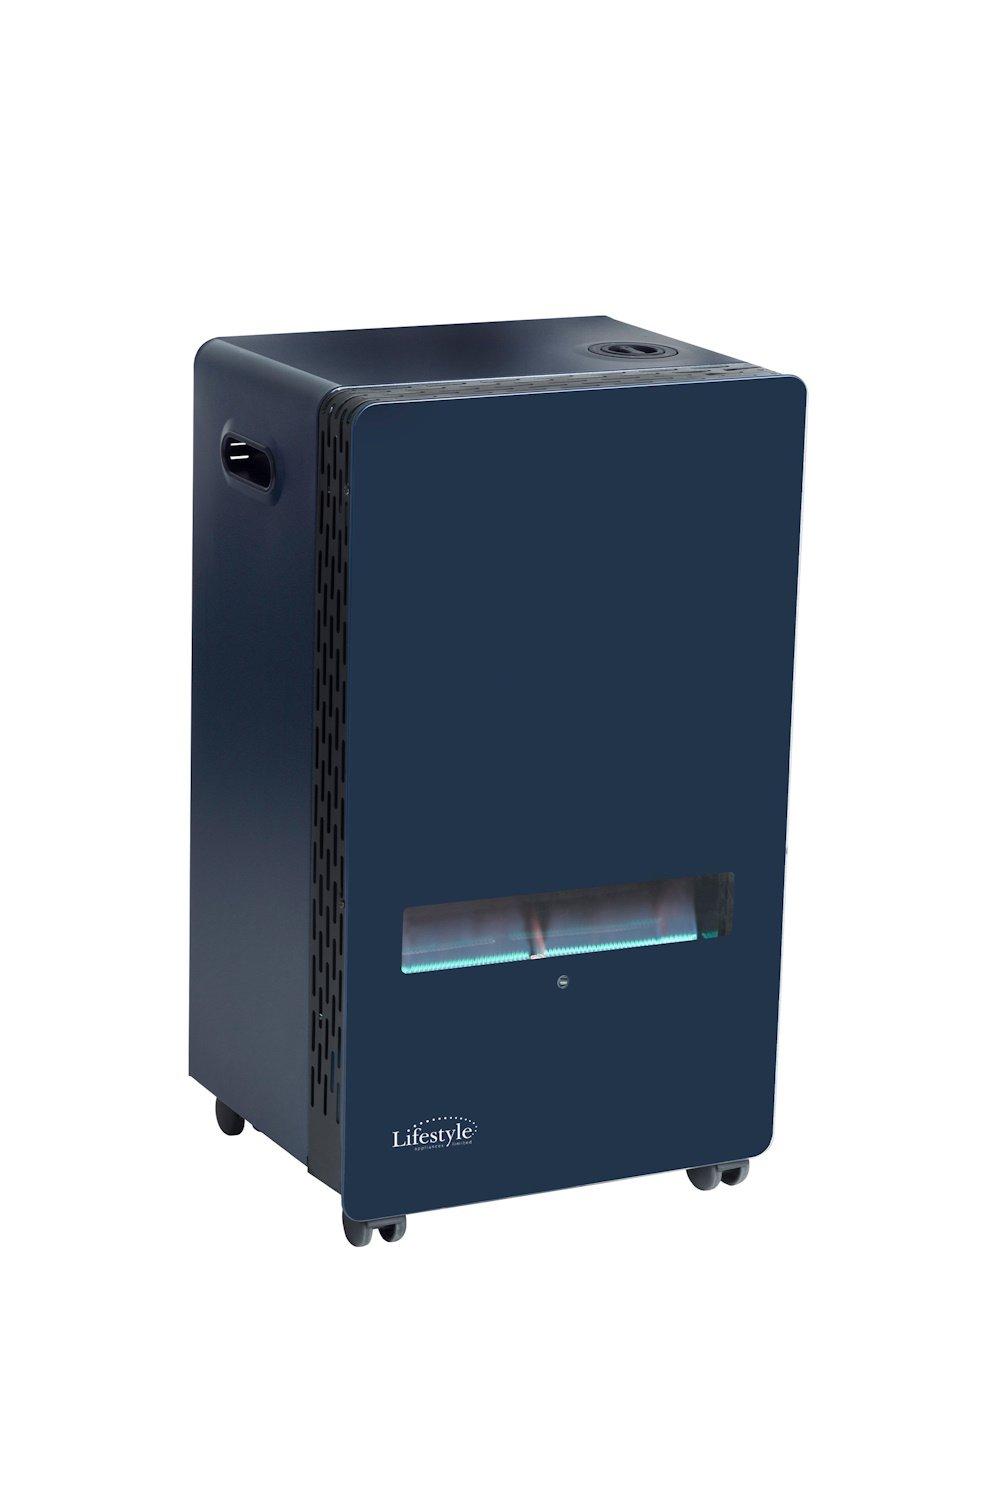 Lifestyle Azure Blue Flame Indoor Cabinet Heater